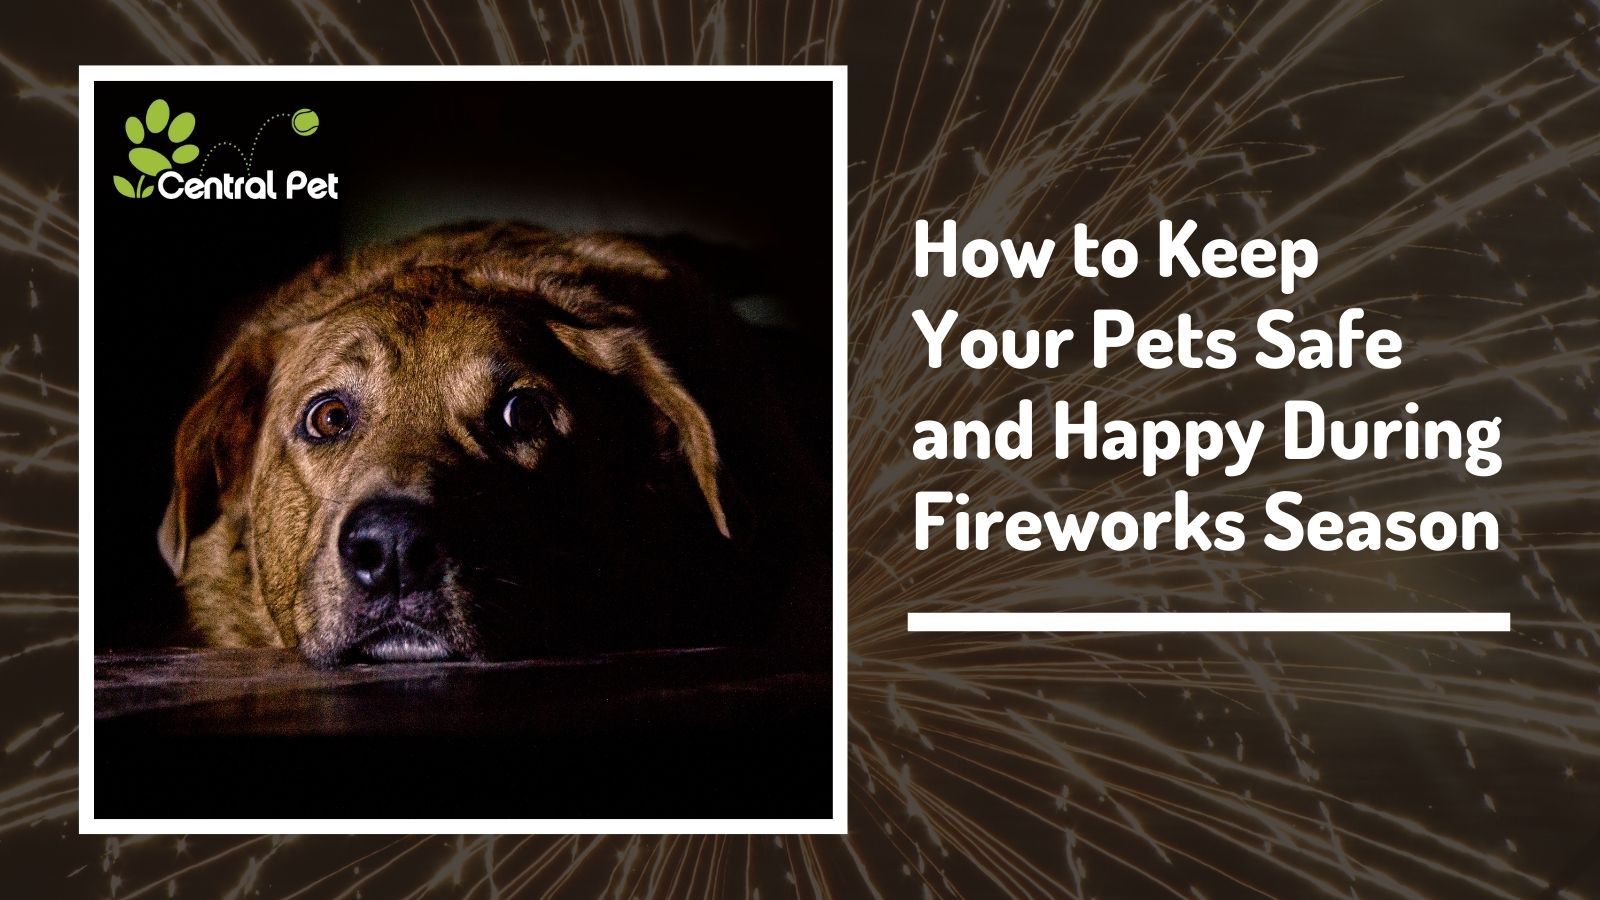 How to Help Your Pets Safe During Fireworks Season